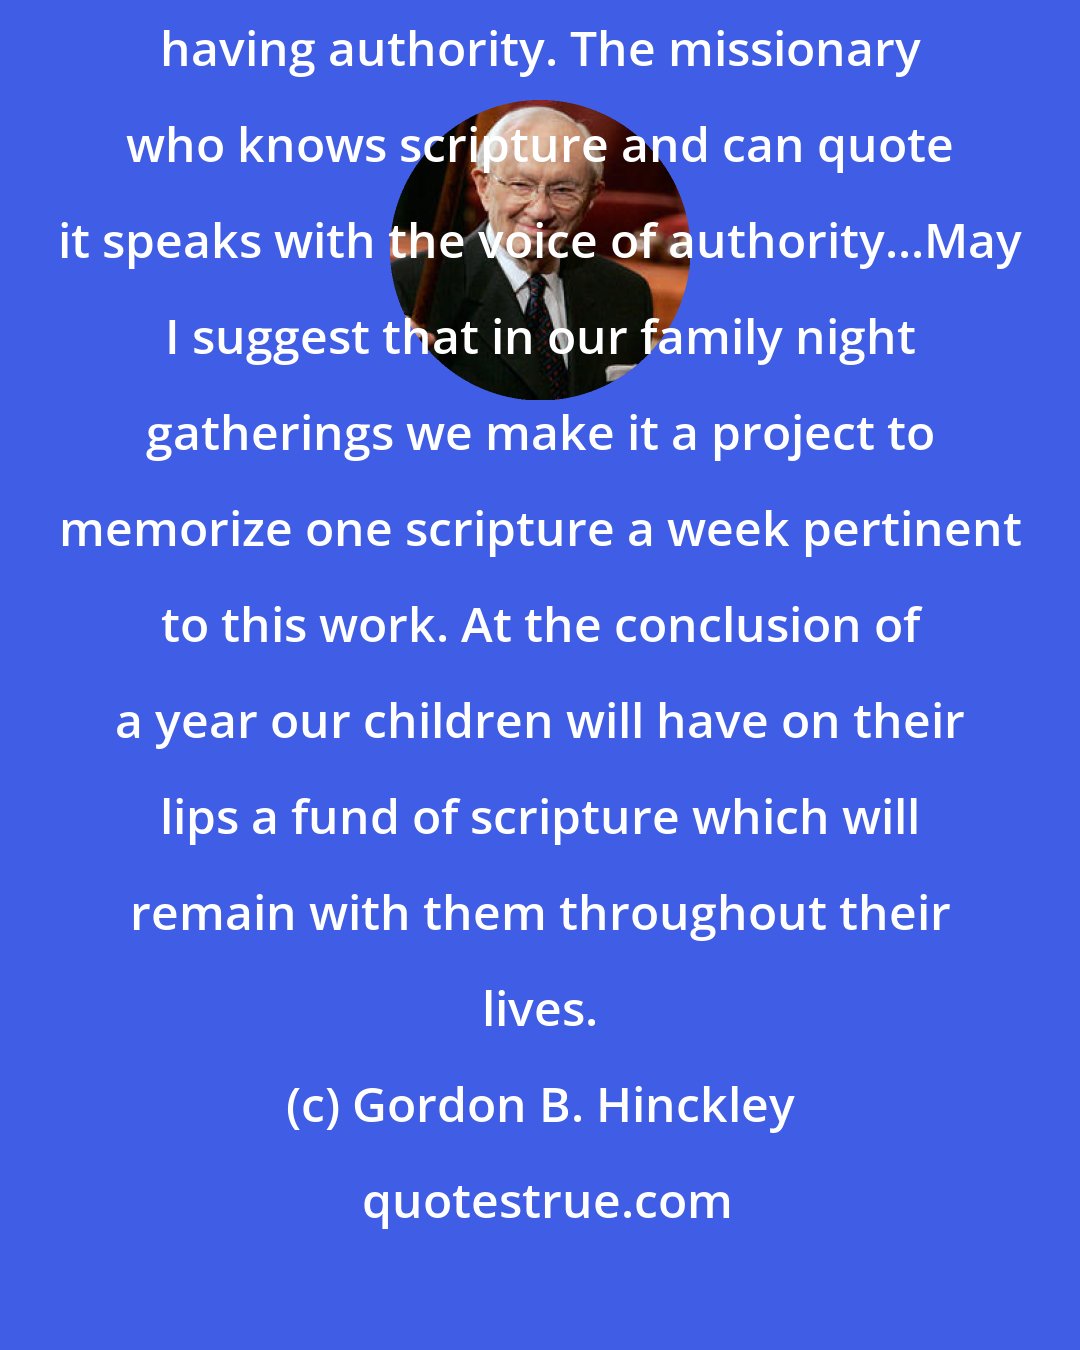 Gordon B. Hinckley: One of the great compliments paid the Savior was that he taught as one having authority. The missionary who knows scripture and can quote it speaks with the voice of authority...May I suggest that in our family night gatherings we make it a project to memorize one scripture a week pertinent to this work. At the conclusion of a year our children will have on their lips a fund of scripture which will remain with them throughout their lives.